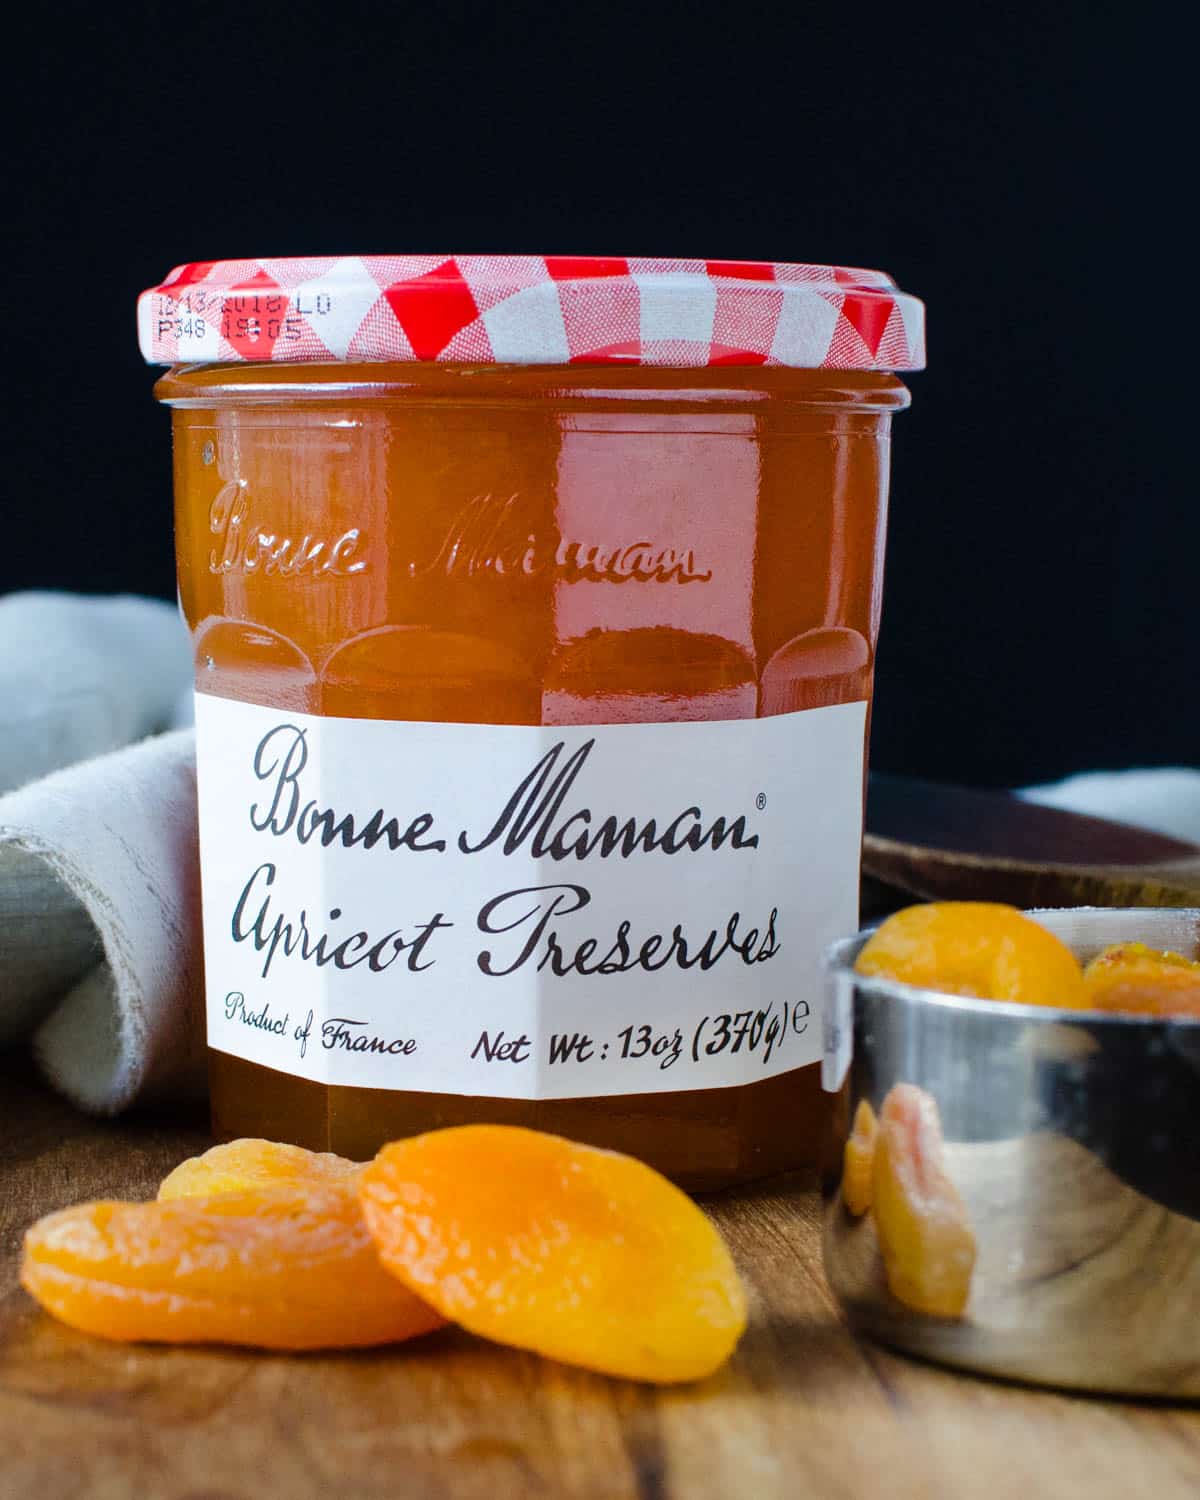 Apricot jam and dried apricots.